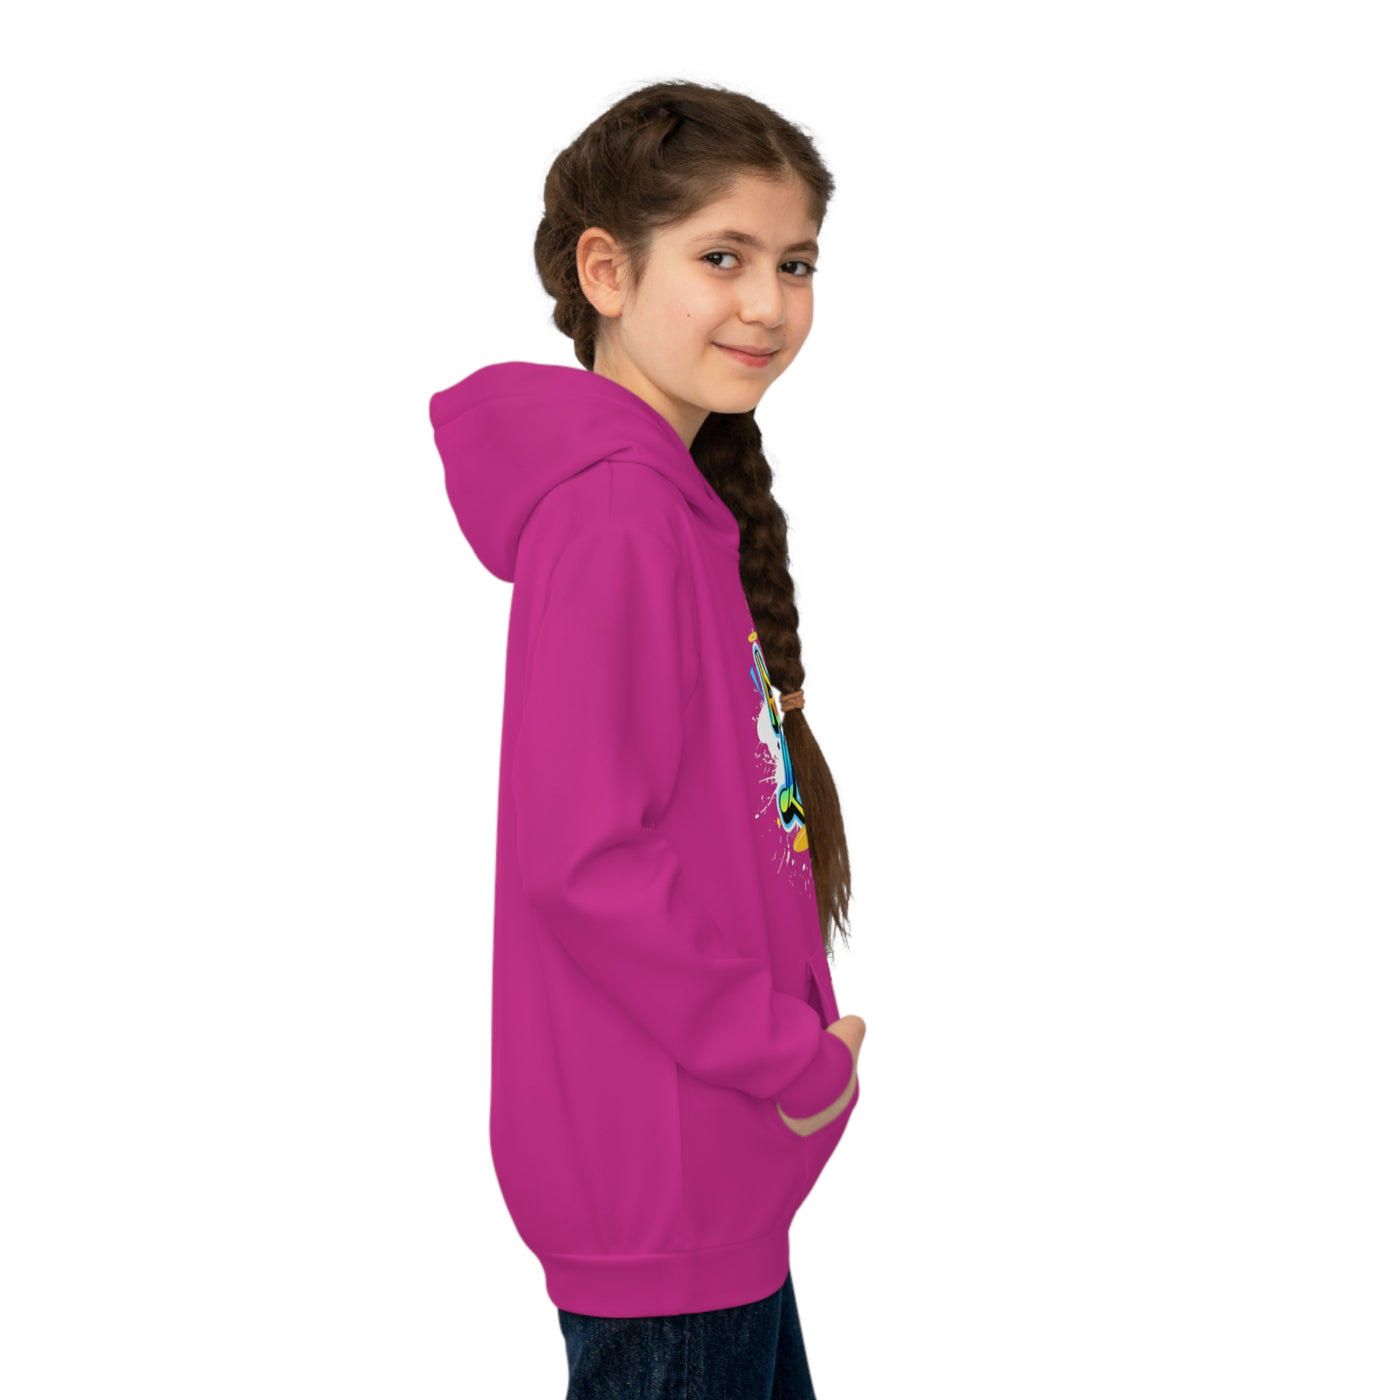 Royalty & Loyalty Kids Hoodie (Pink) Sublimation